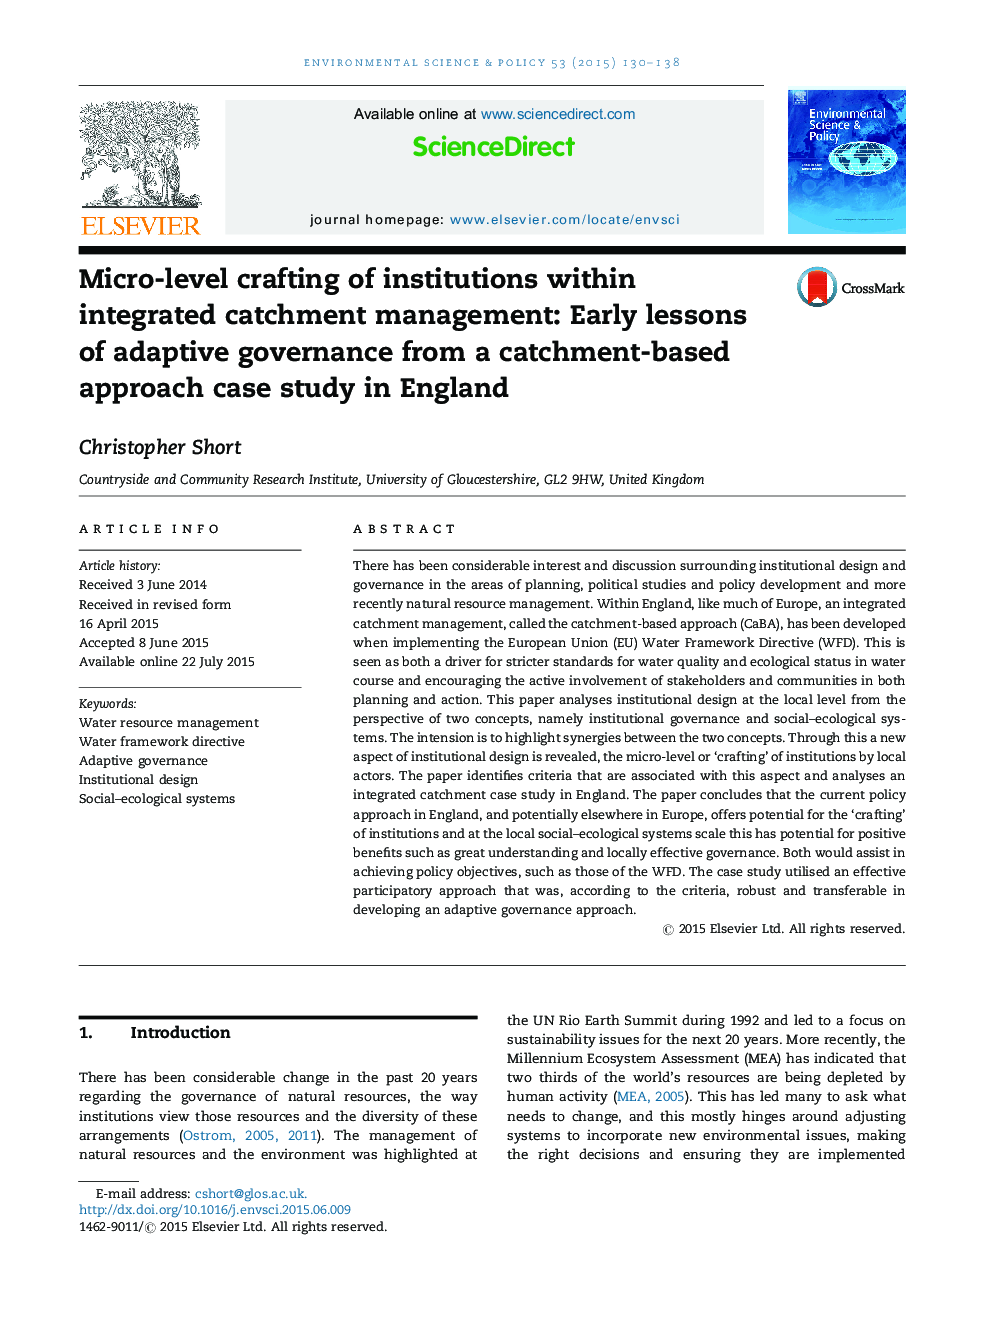 Micro-level crafting of institutions within integrated catchment management: Early lessons of adaptive governance from a catchment-based approach case study in England